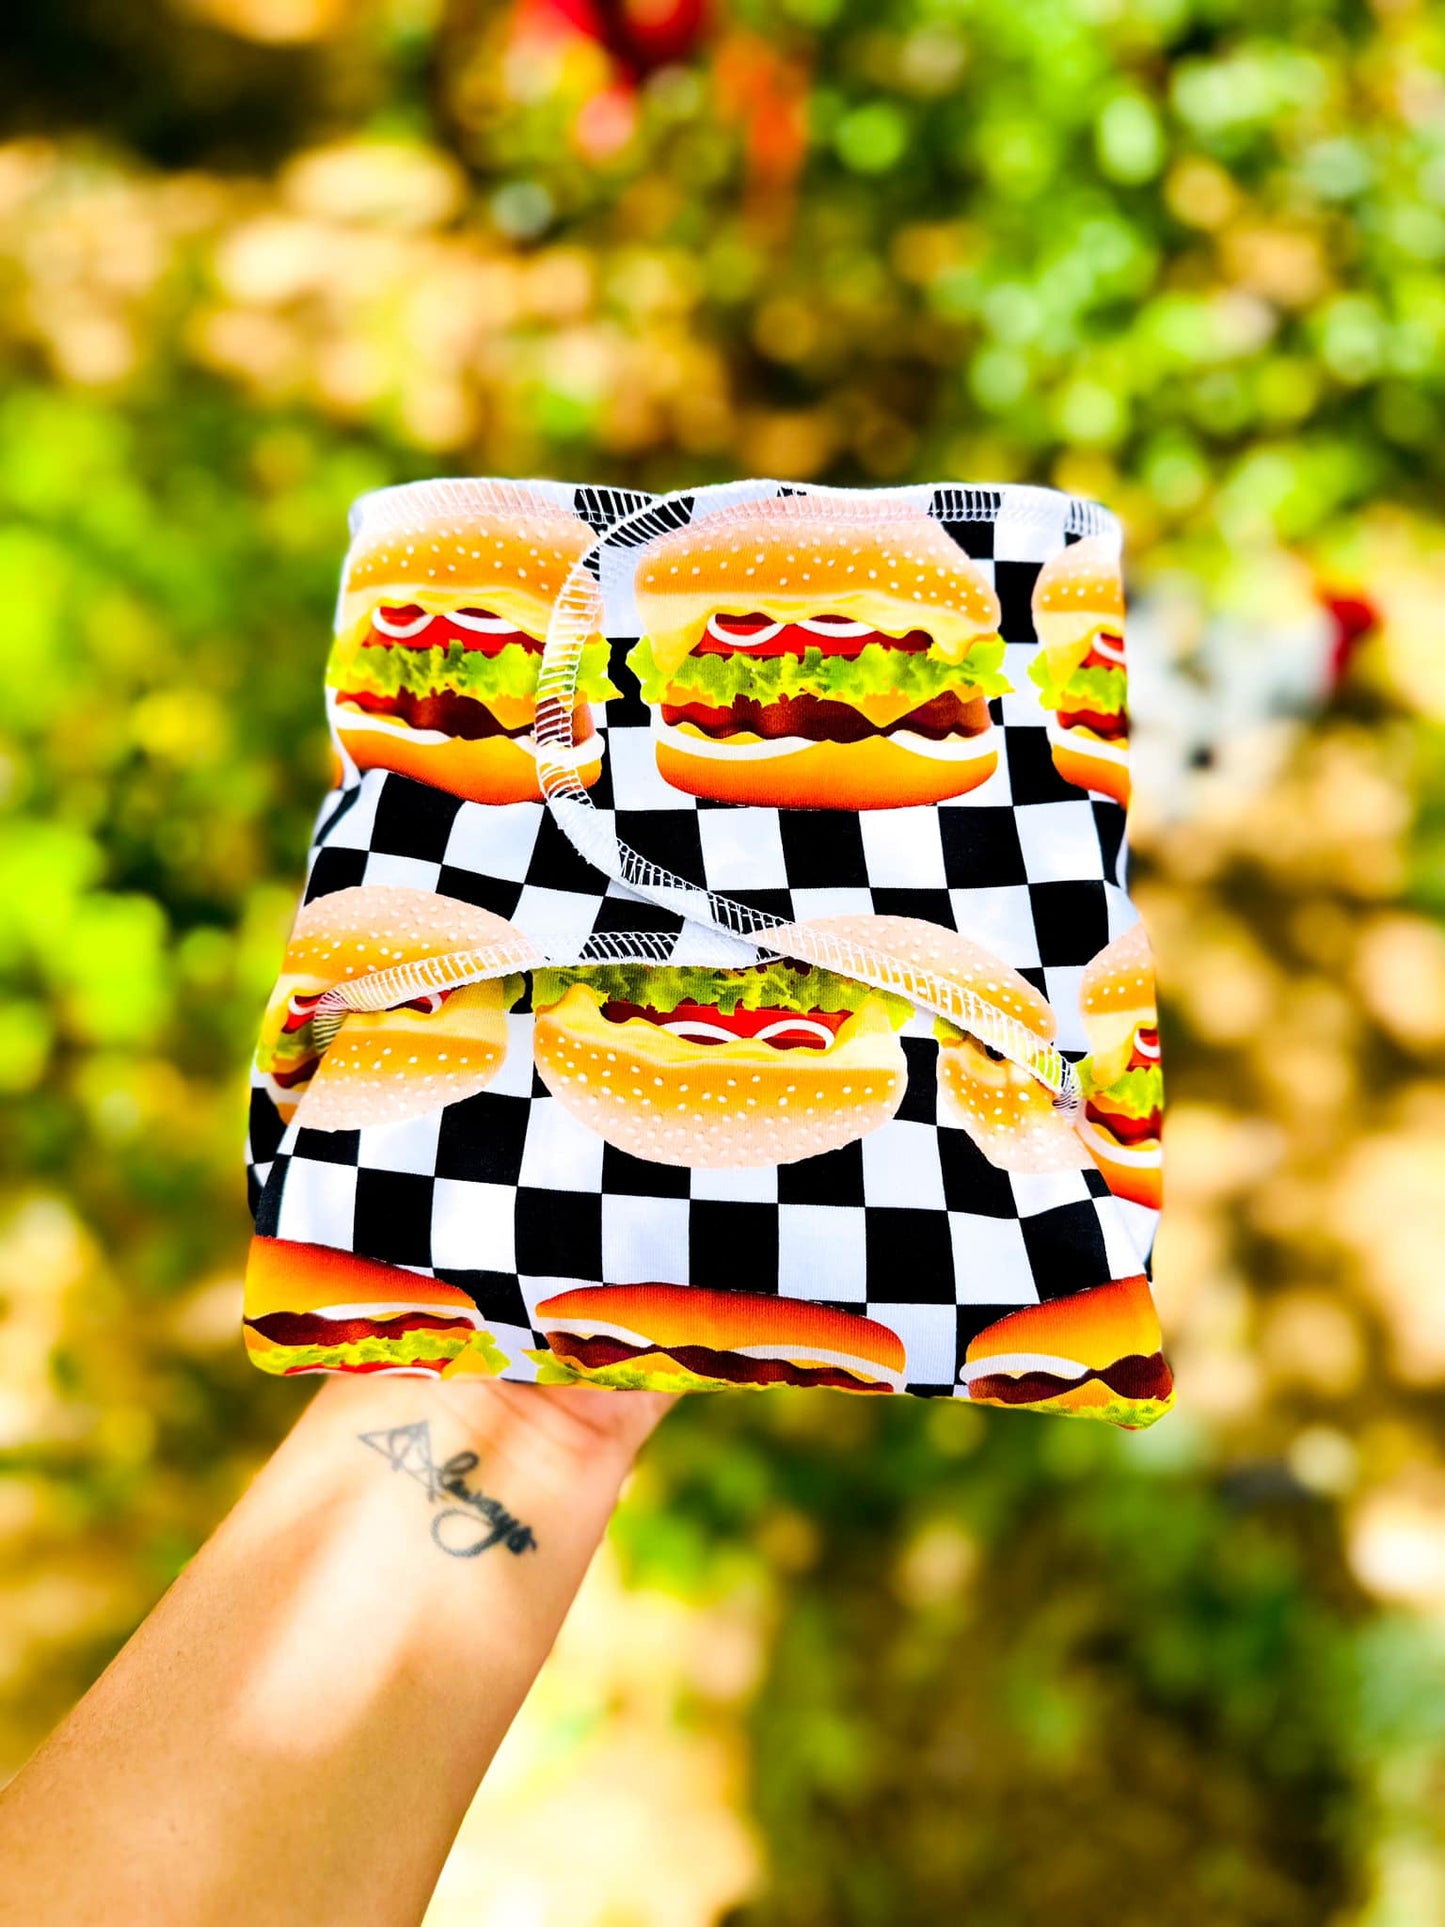 IN STOCK FHF Preflats: Checkered Cheeseburgers